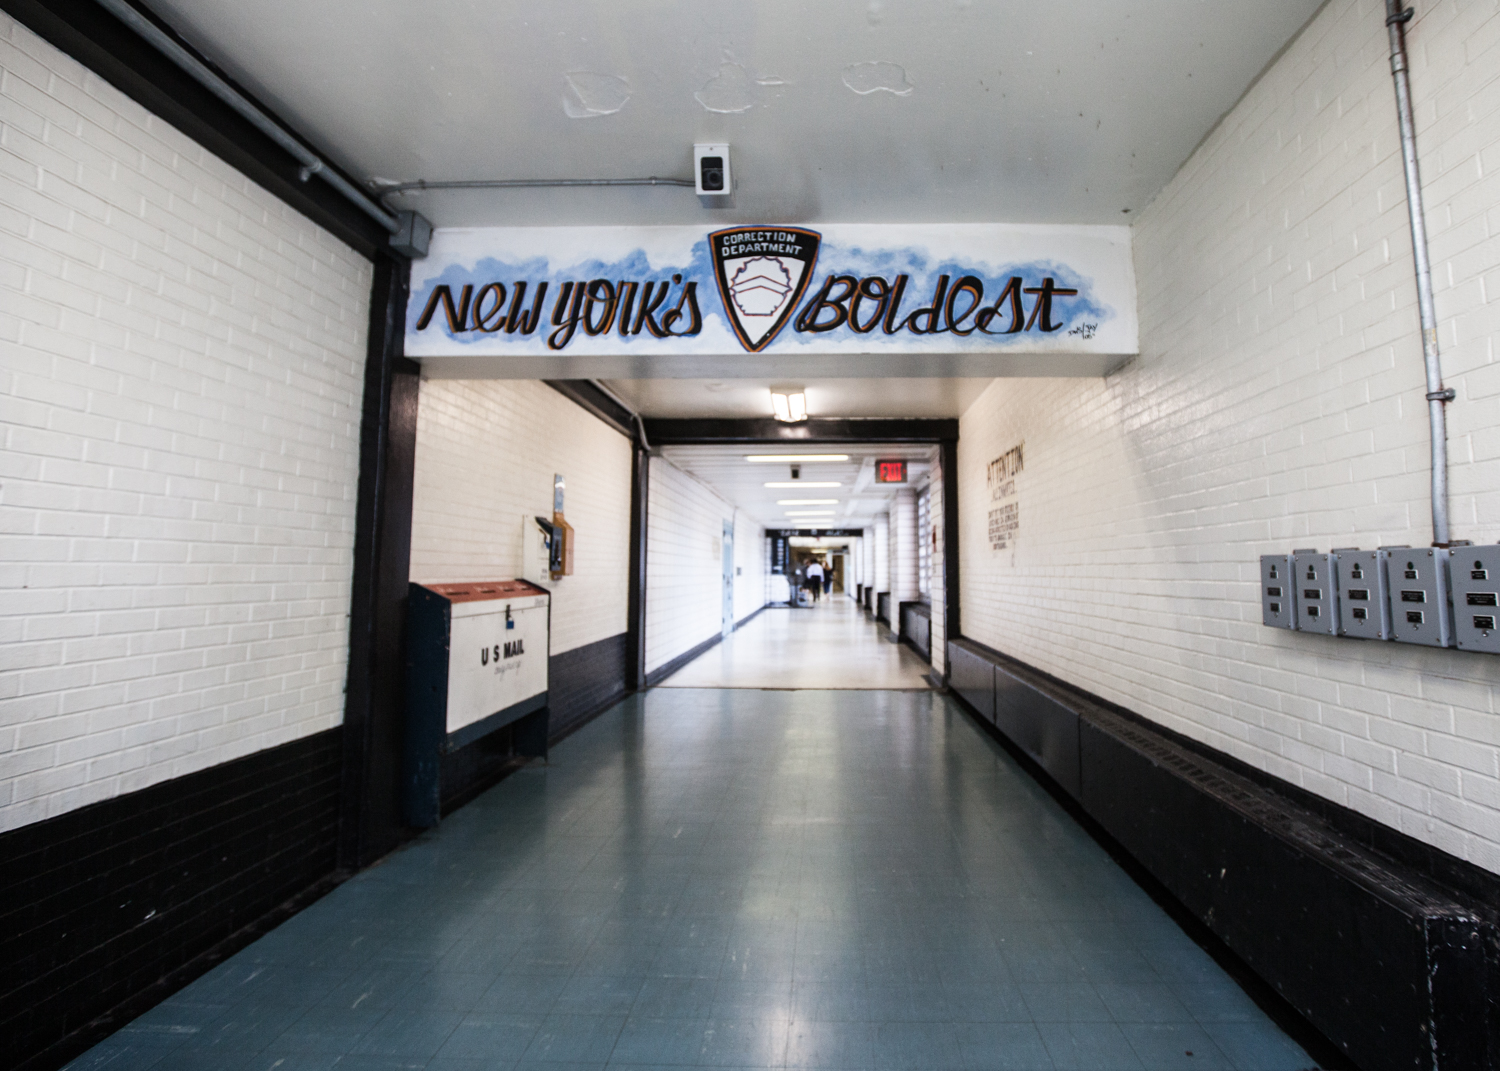 The halls of the George Motchan Detention Center on Rikers Island. PHOTO: Emily Assiran for Observer